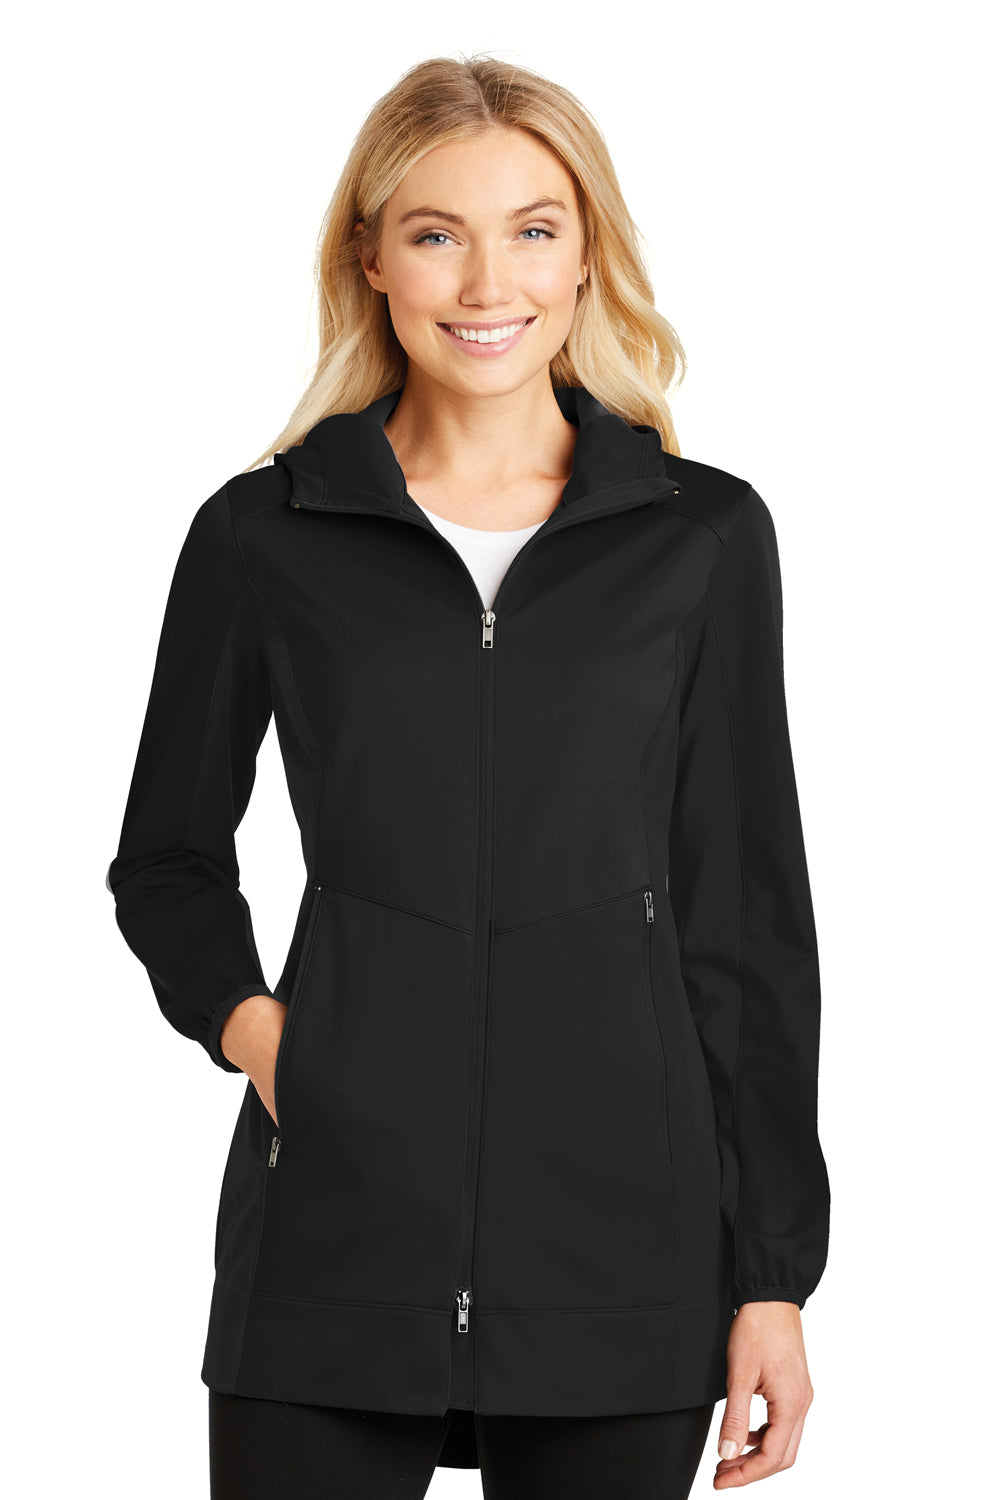 Port Authority L719 Womens Active Wind & Water Resistant Full Zip Hooded Jacket Black Front